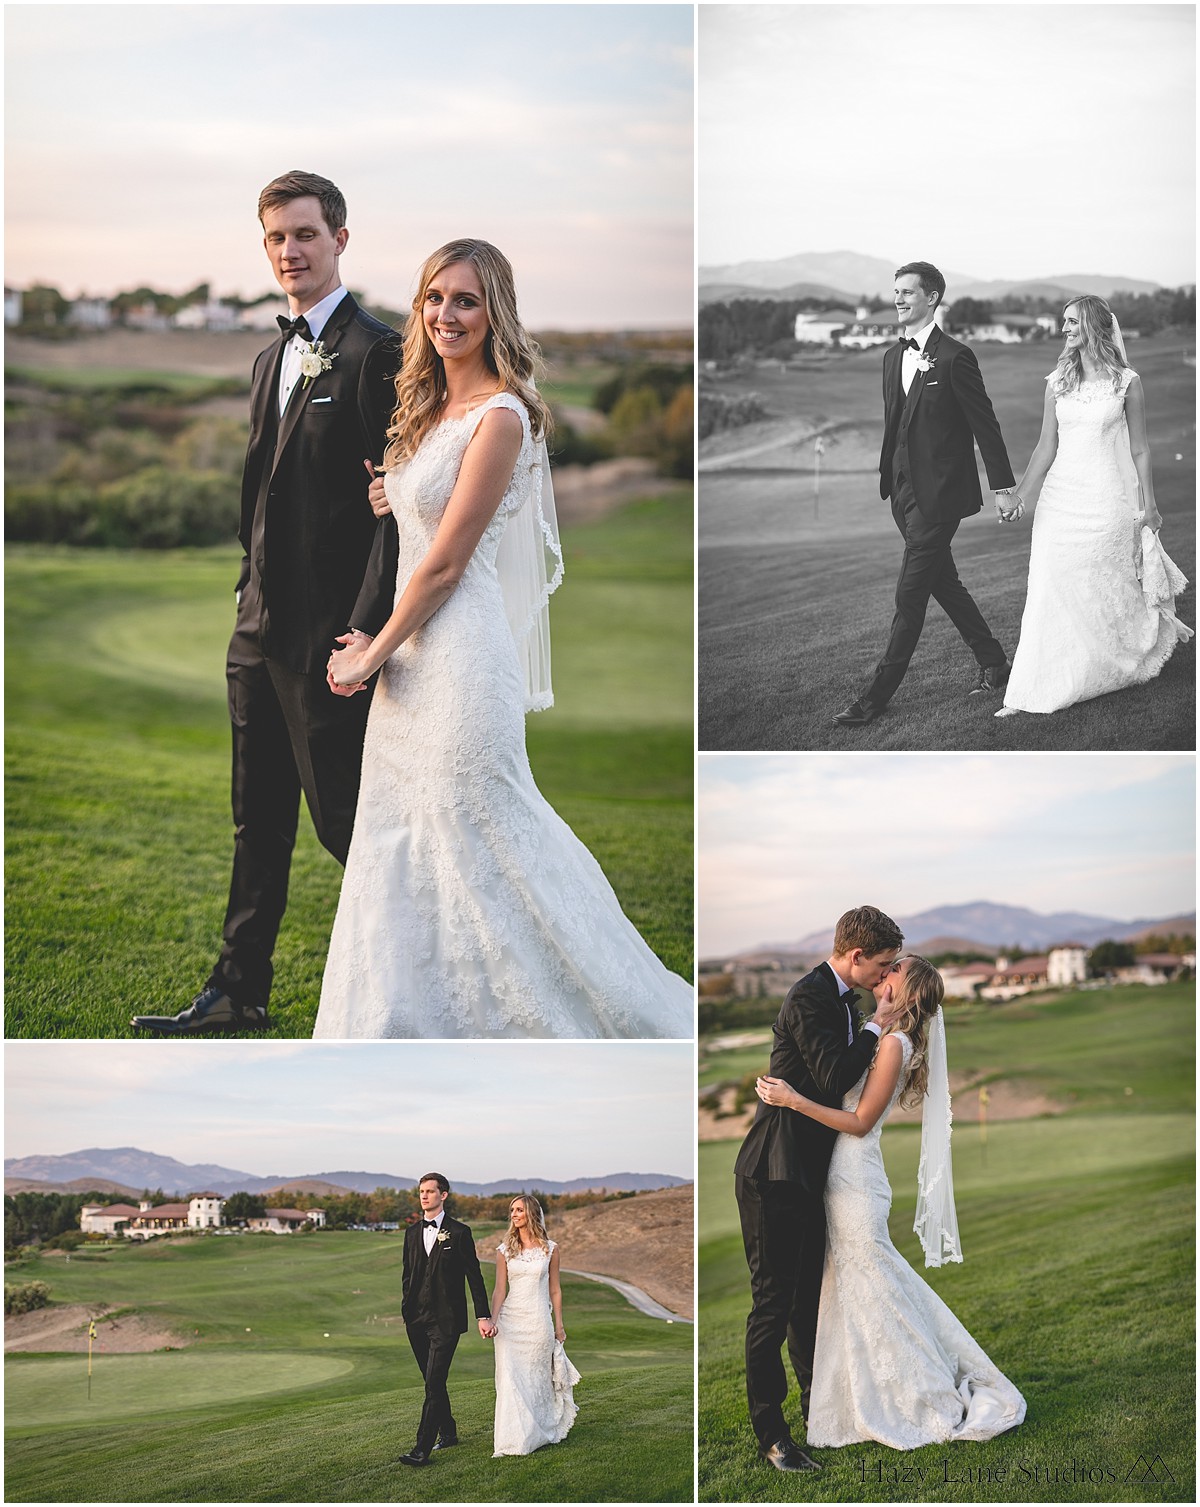 bride and groom walking together on the golf course